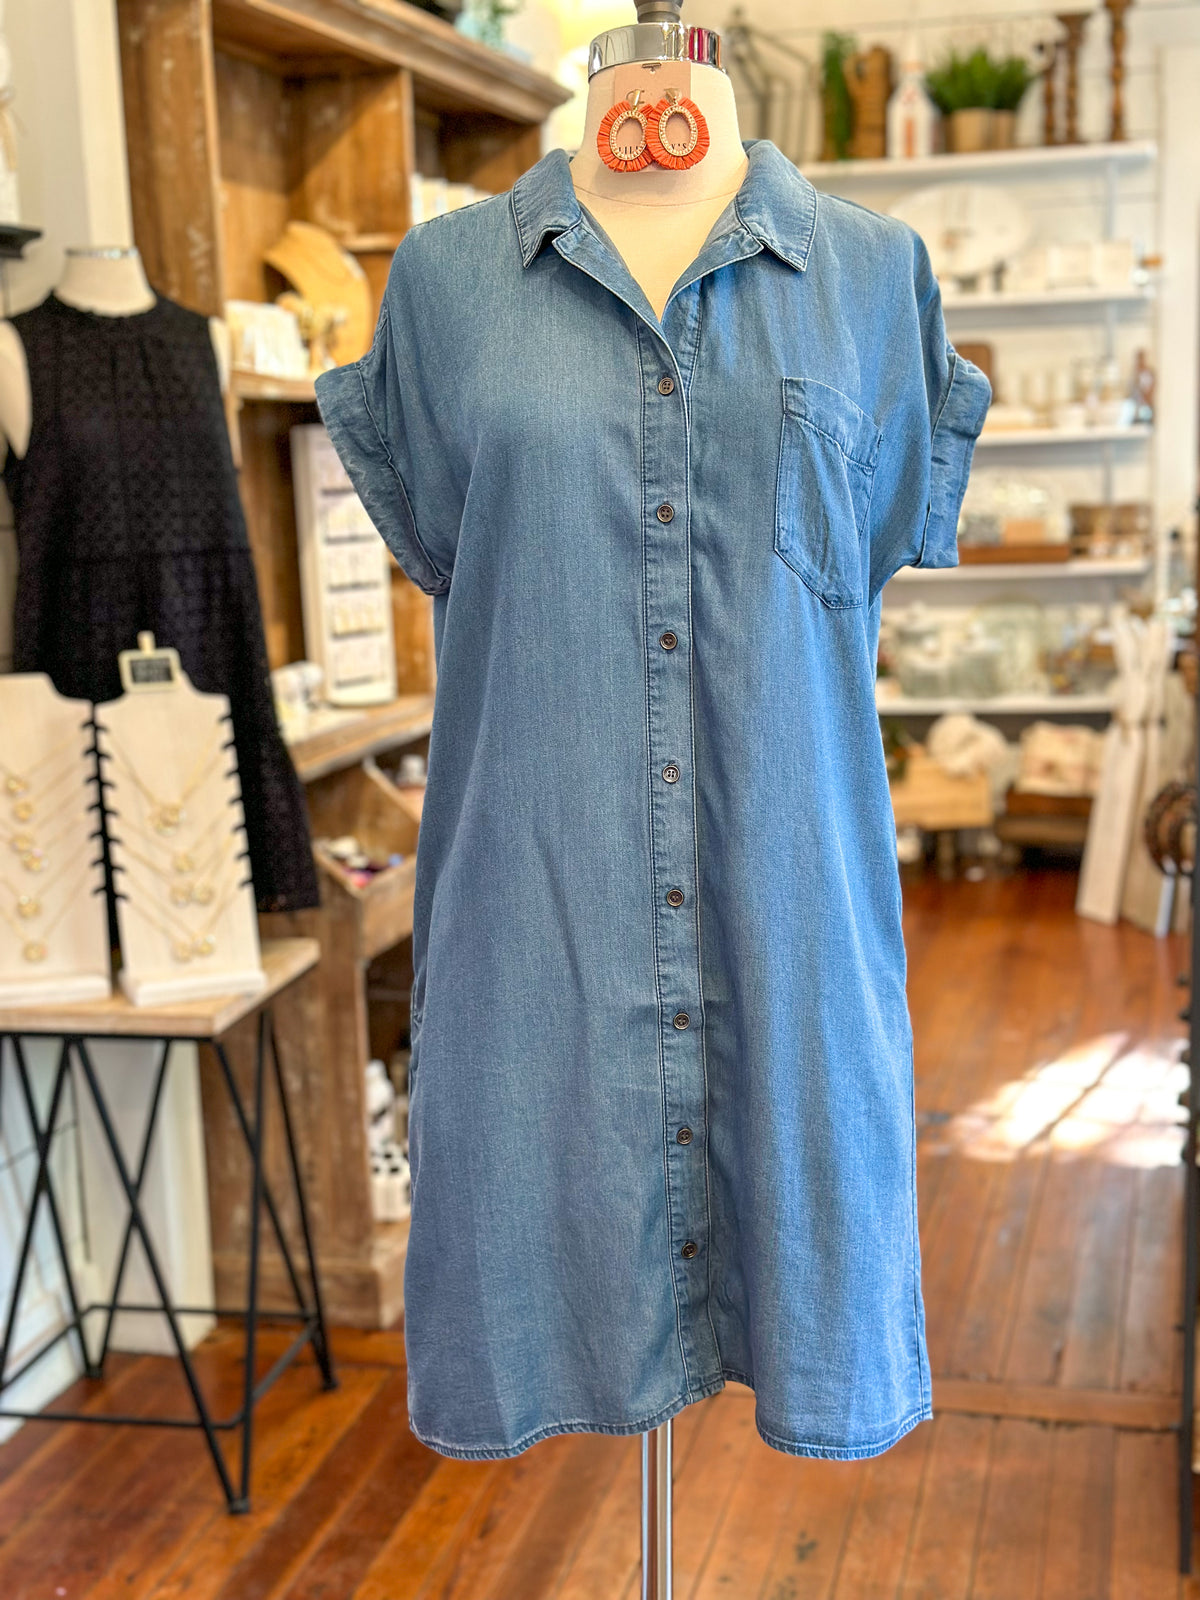 denim button down dress with pocket on front chest